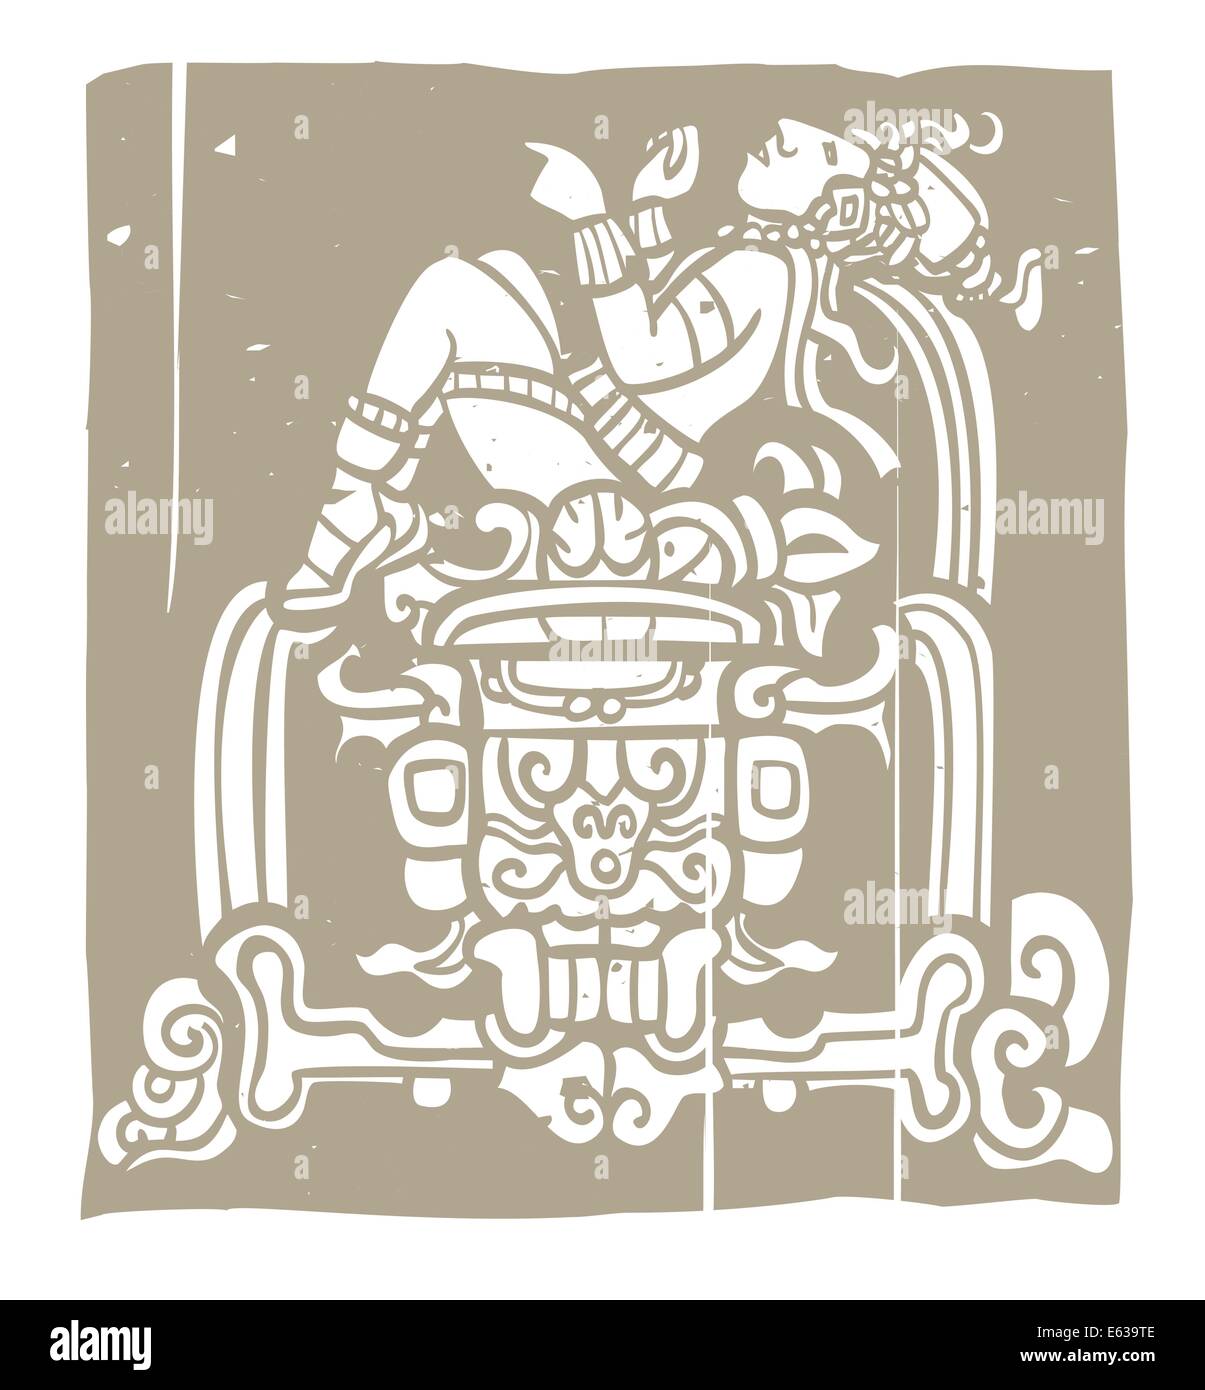 Reclining Mayan with throne adapted from temple images. Stock Vector